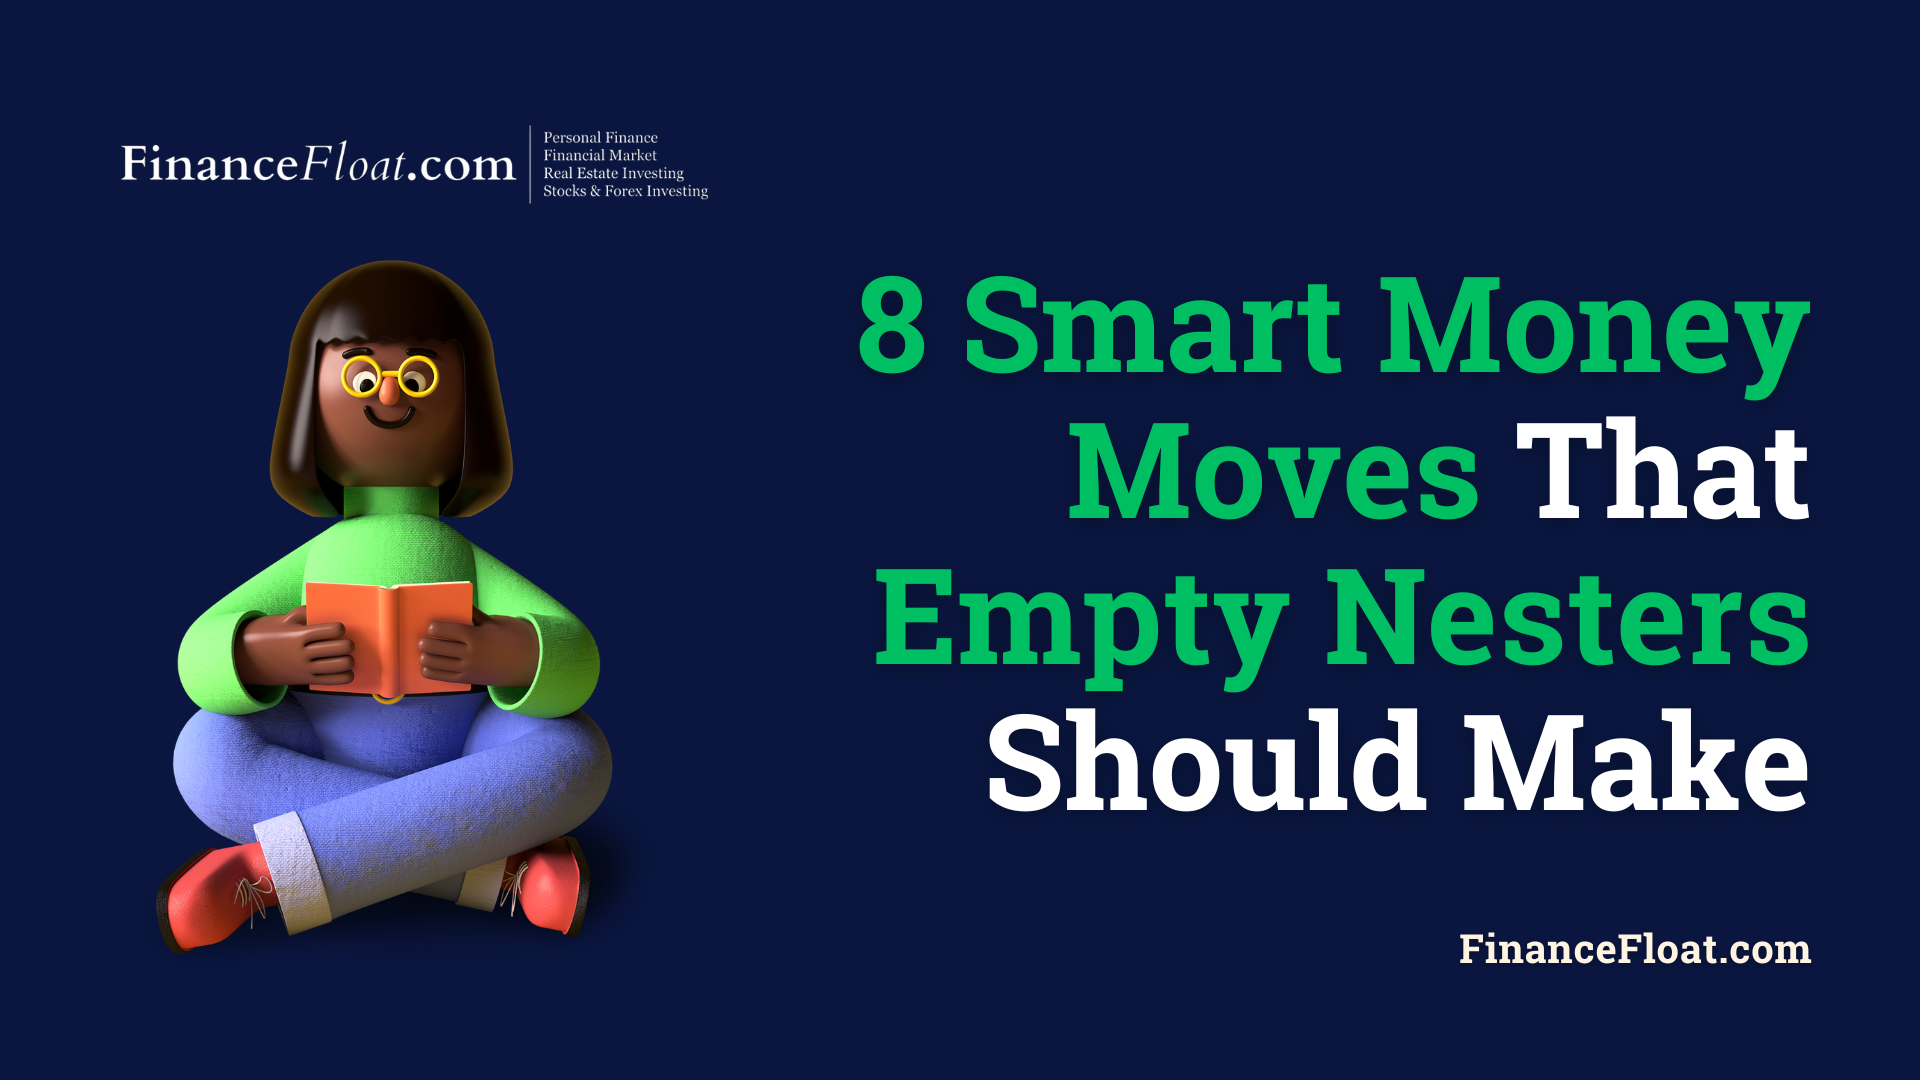 8 Smart Money Moves That Empty Nesters Should Make